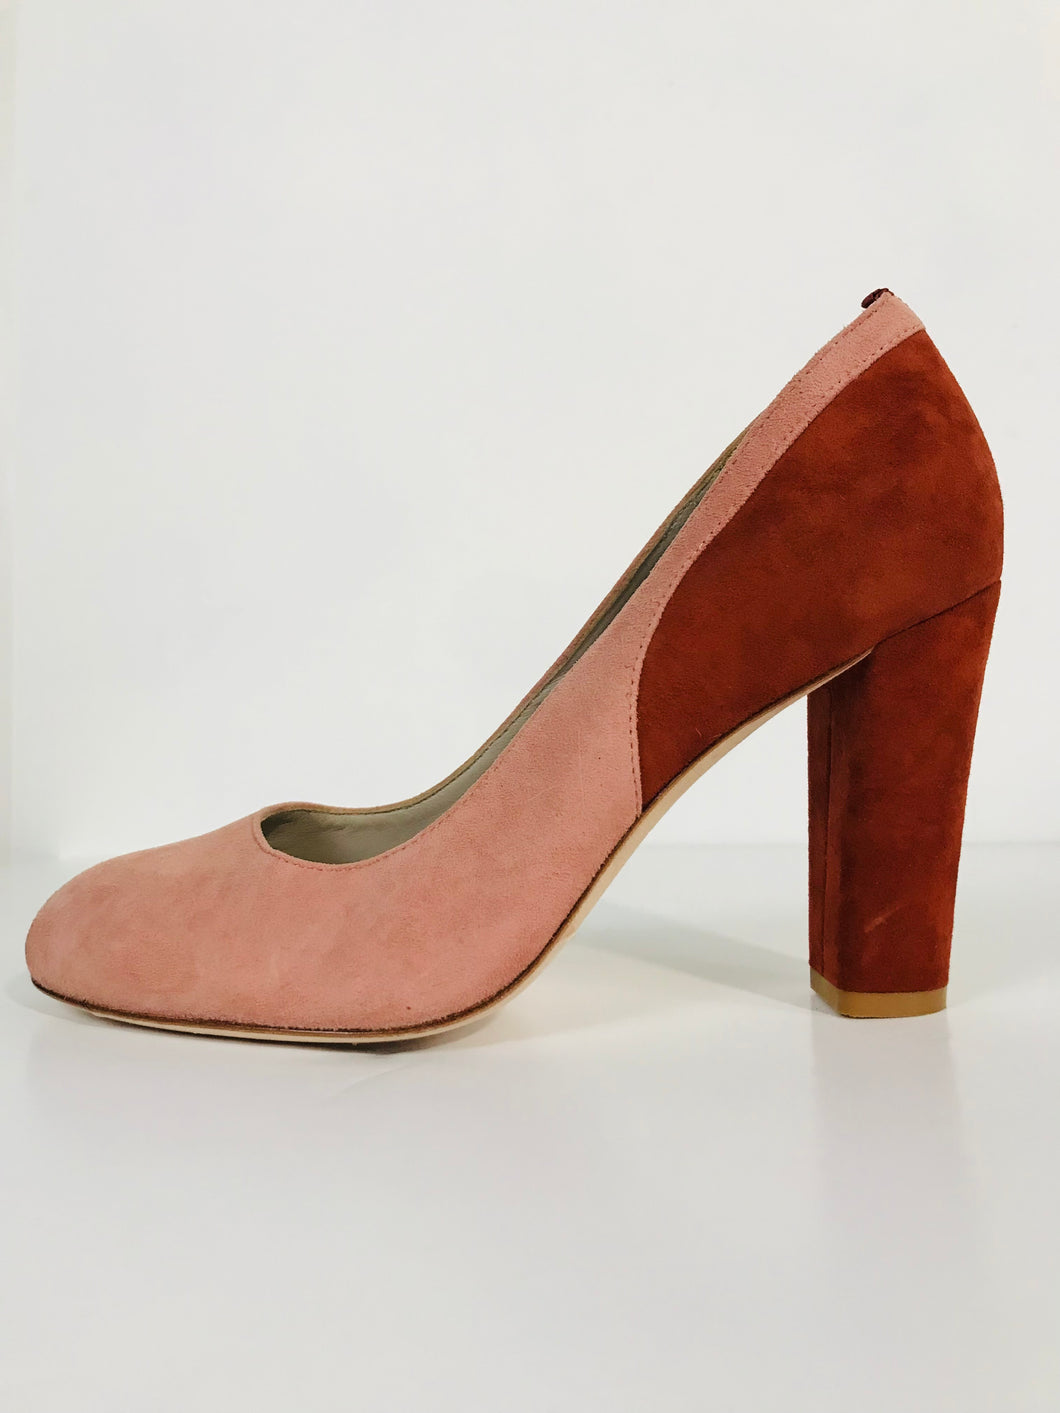 Boden Women's Suede Real Leather Heels | 38 UK5 | Pink